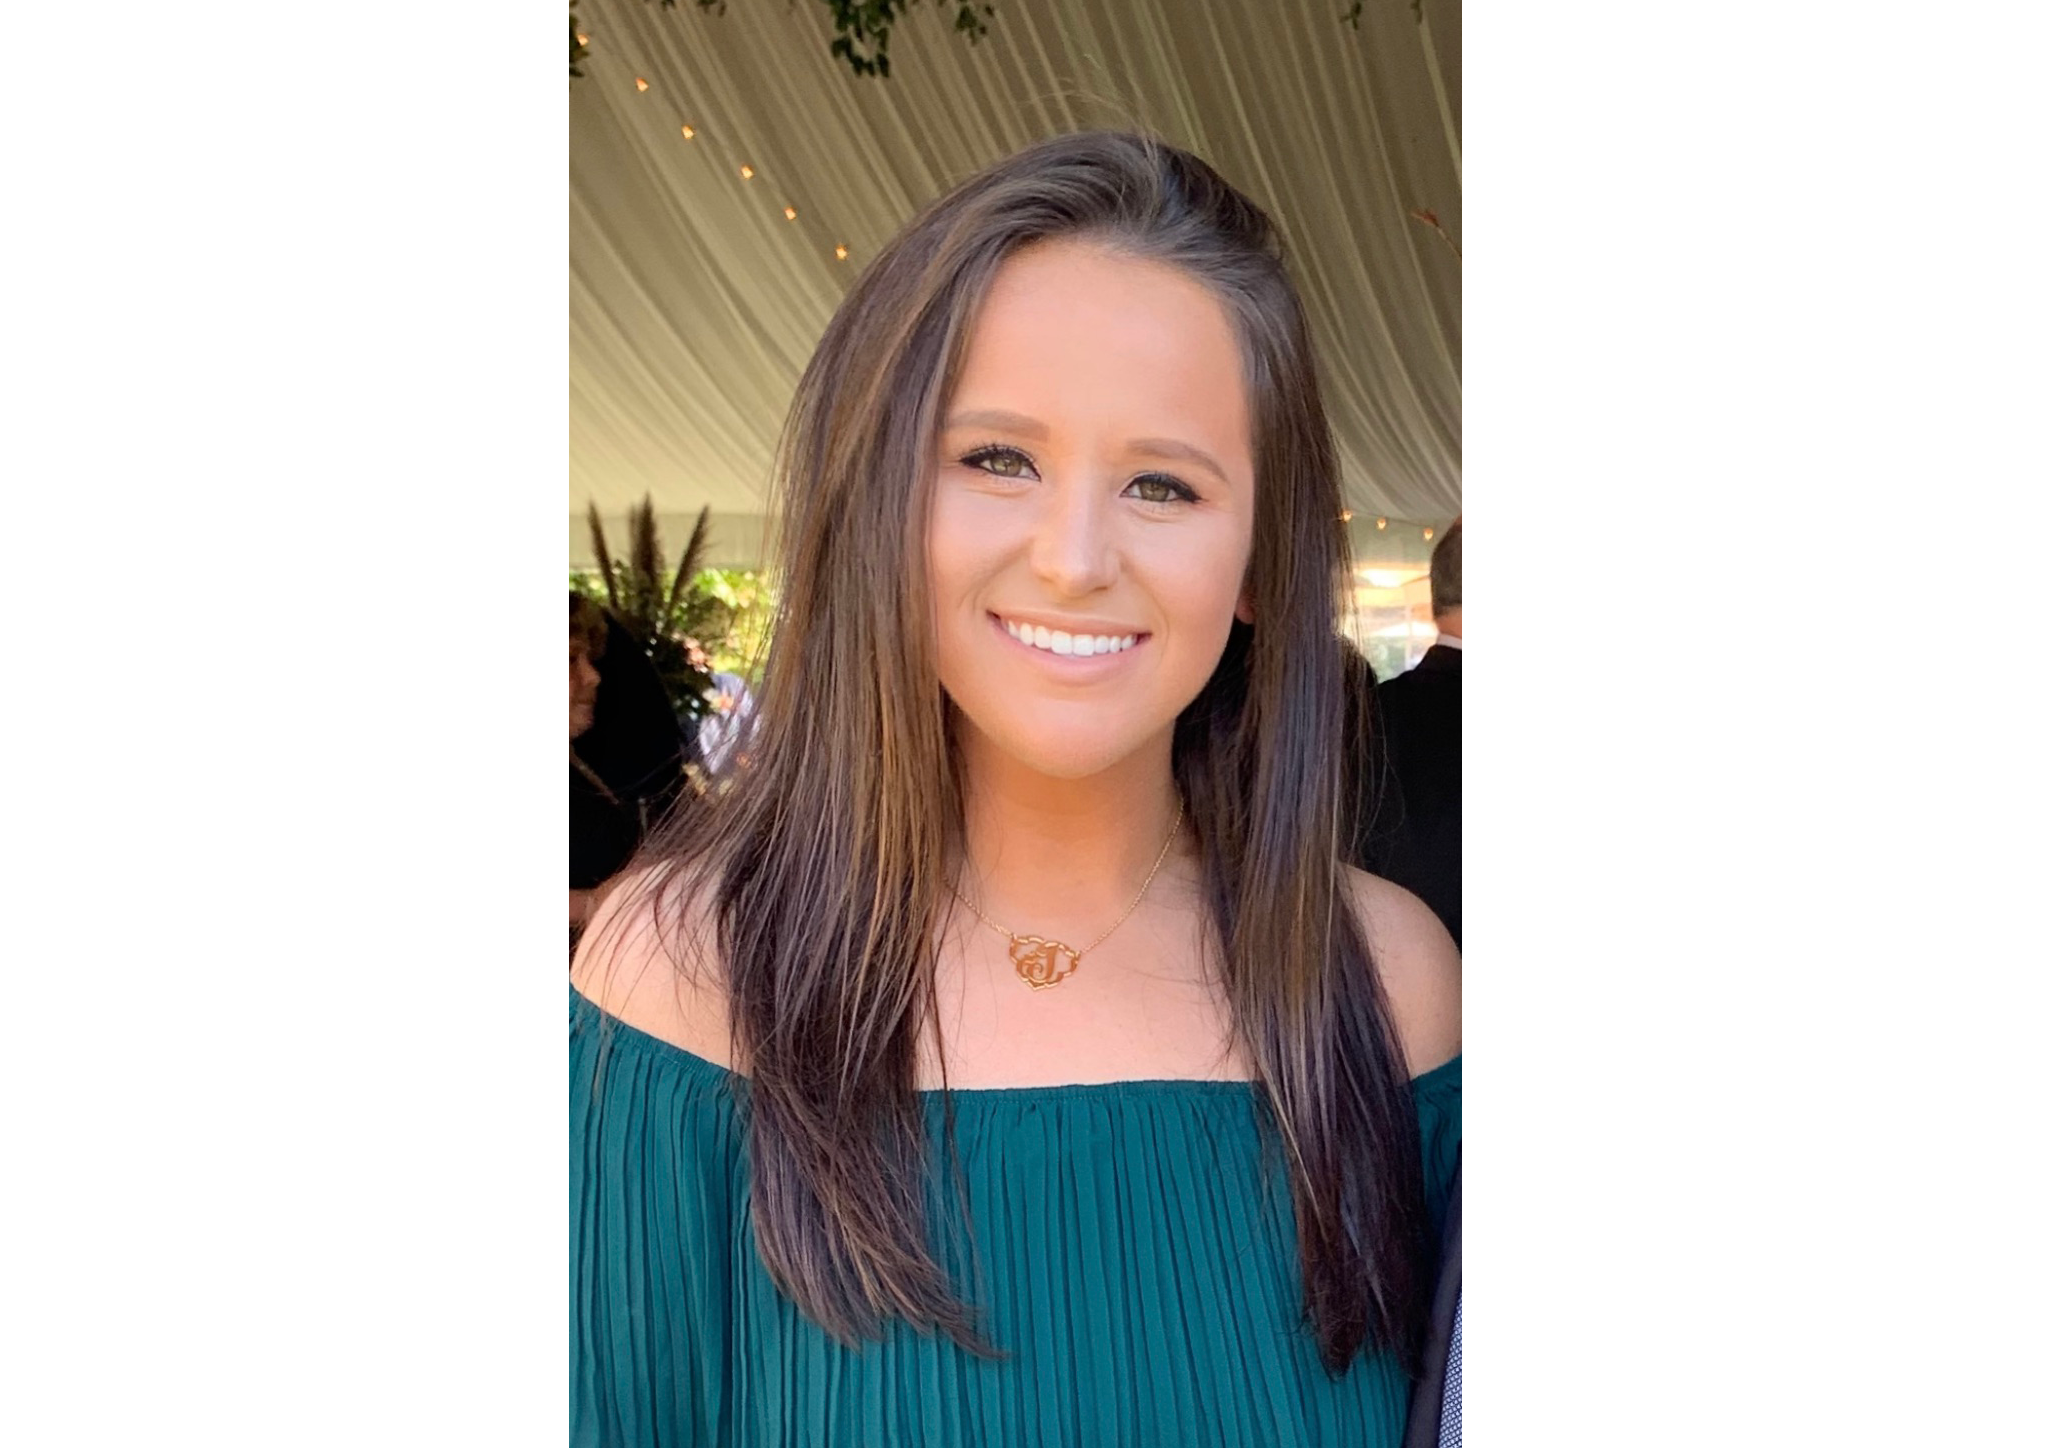 VIZpin Welcomes Jenna Turnbull as Customer Experience Specialist